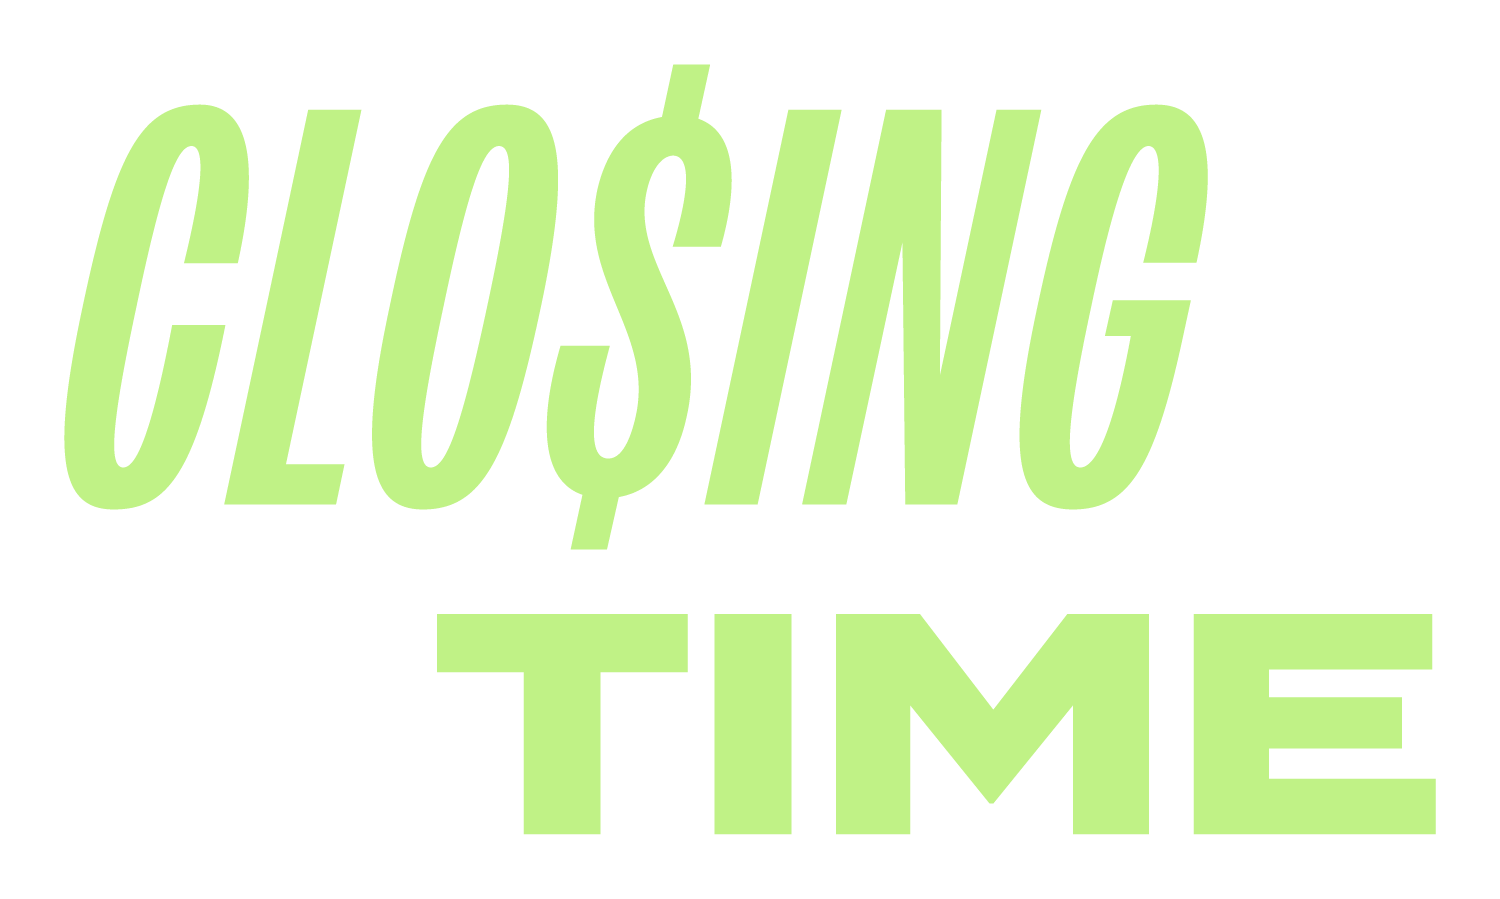 Closing Time Podcast